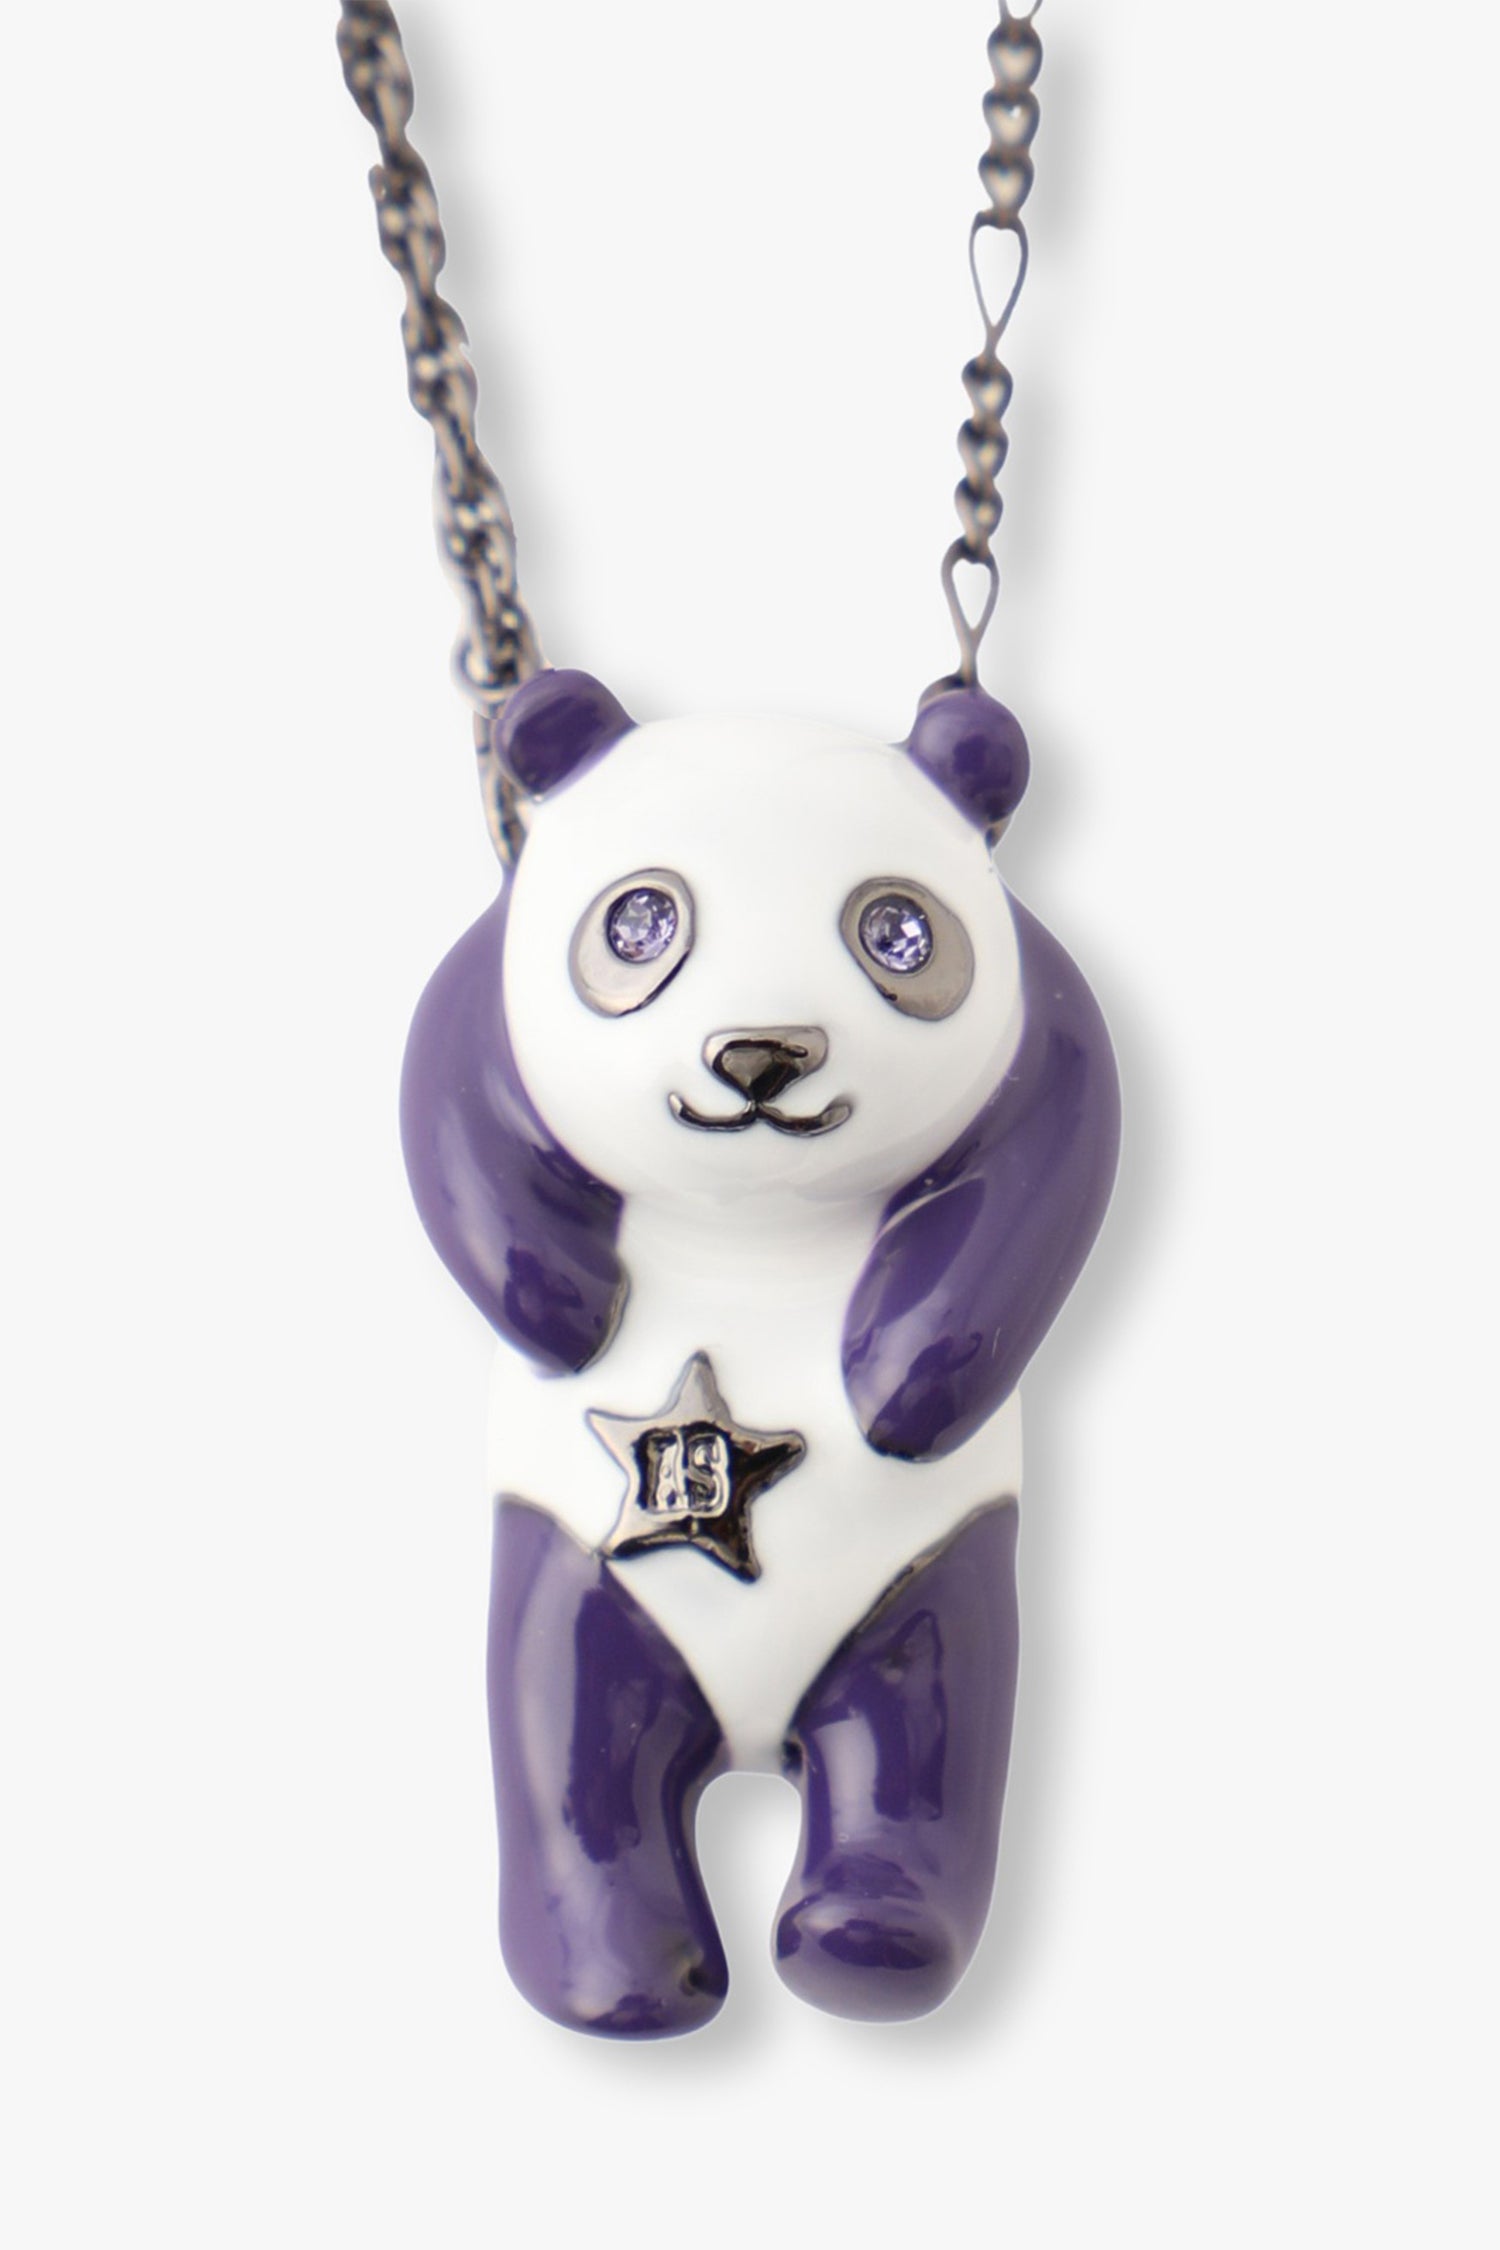 Panda is white on head and body, purple arms legs and ears, eyes with gems, star with AS on body